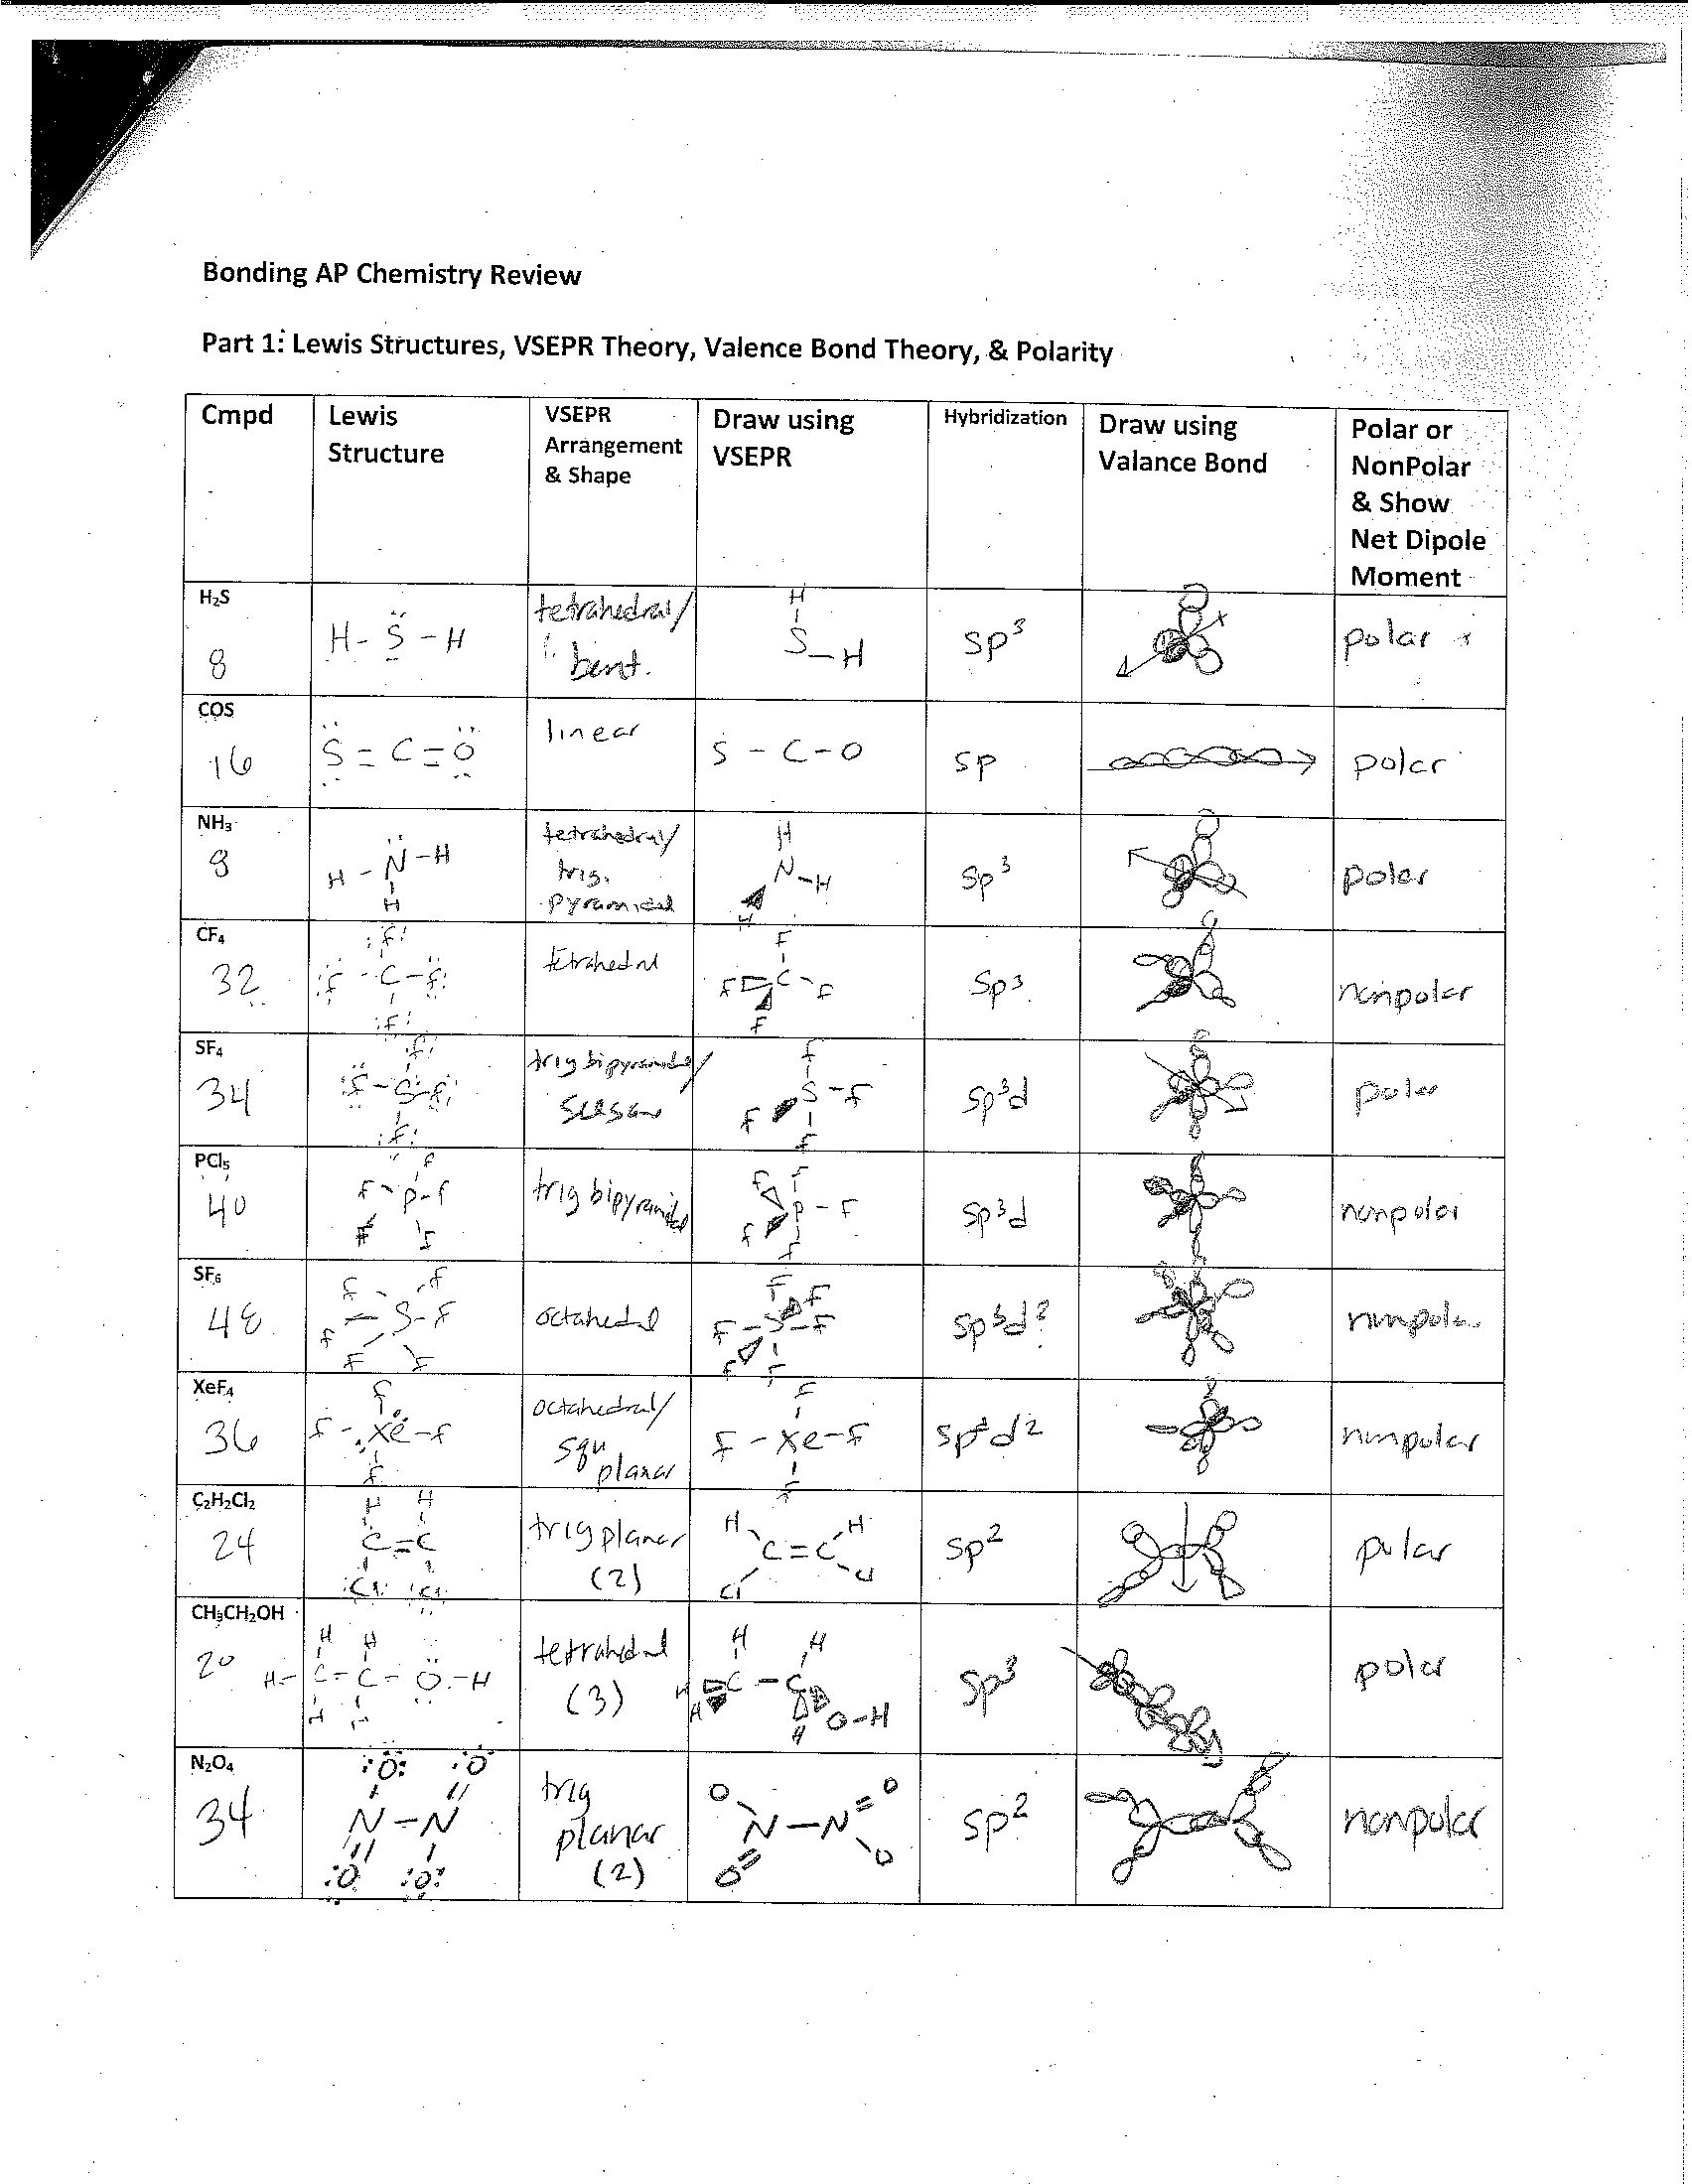 Lewis Structure Worksheet with Answers Vsepr theory Worksheet with Answers